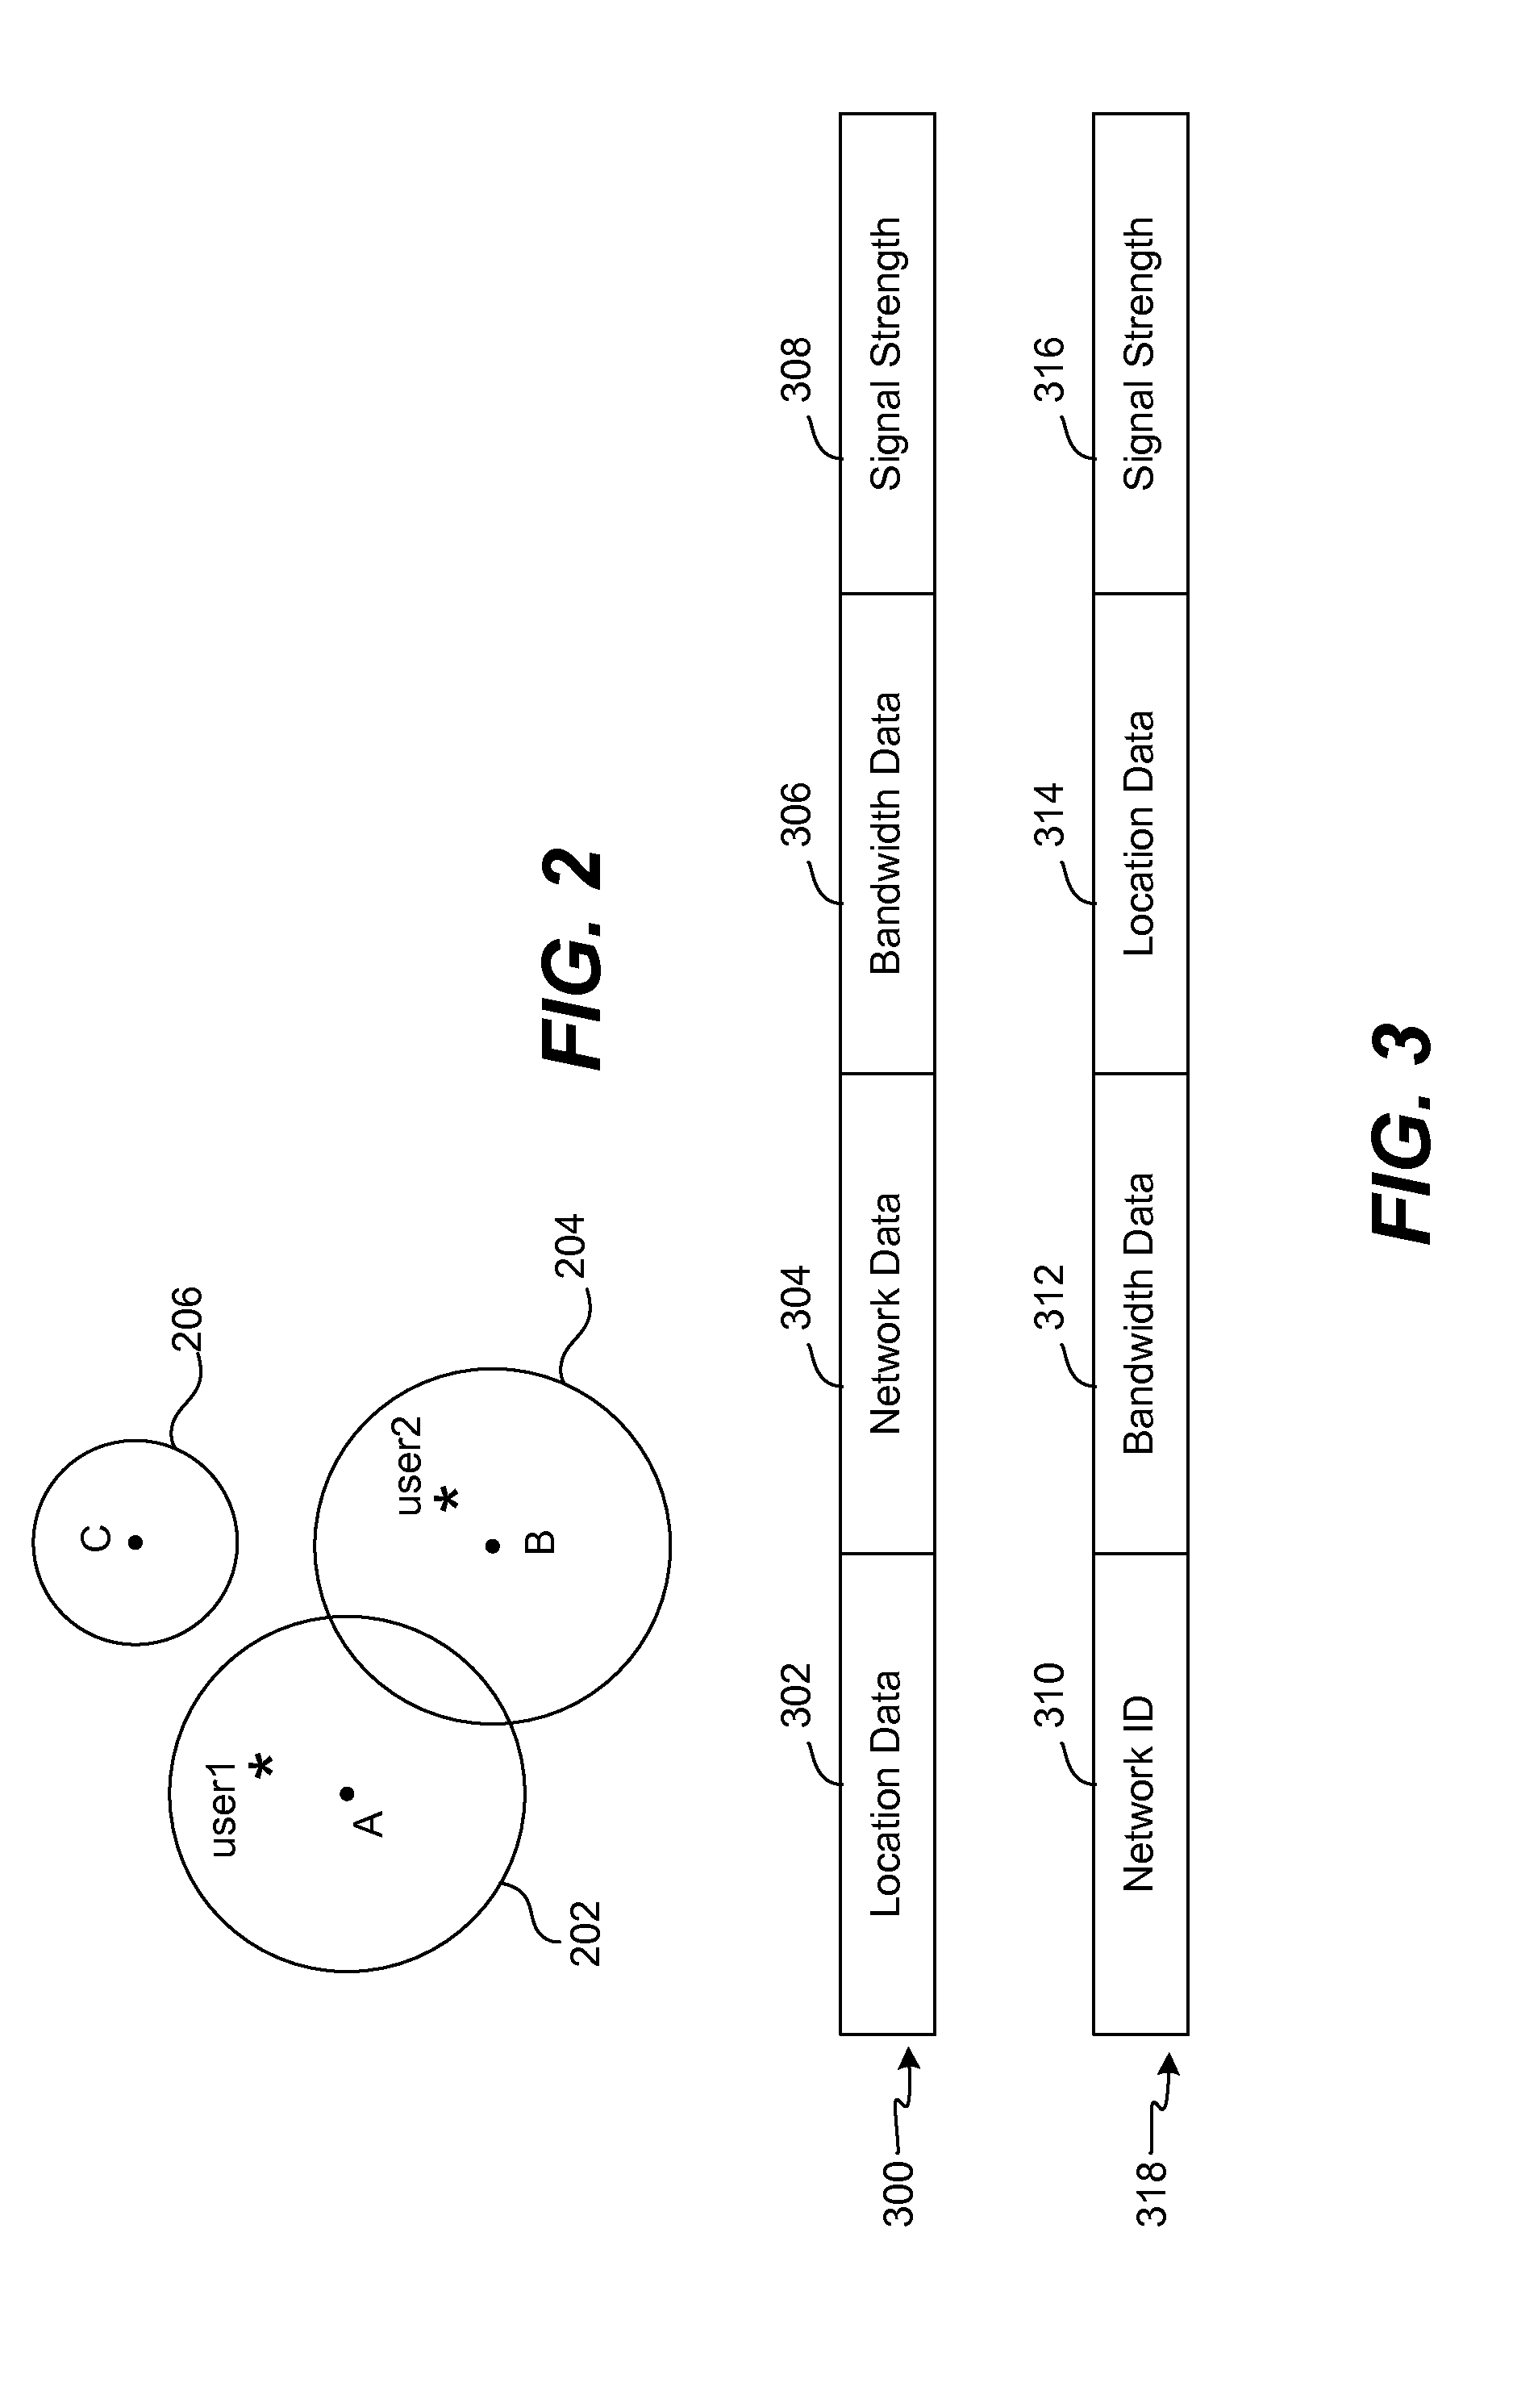 Agent-based bandwith monitoring for predictive network selection